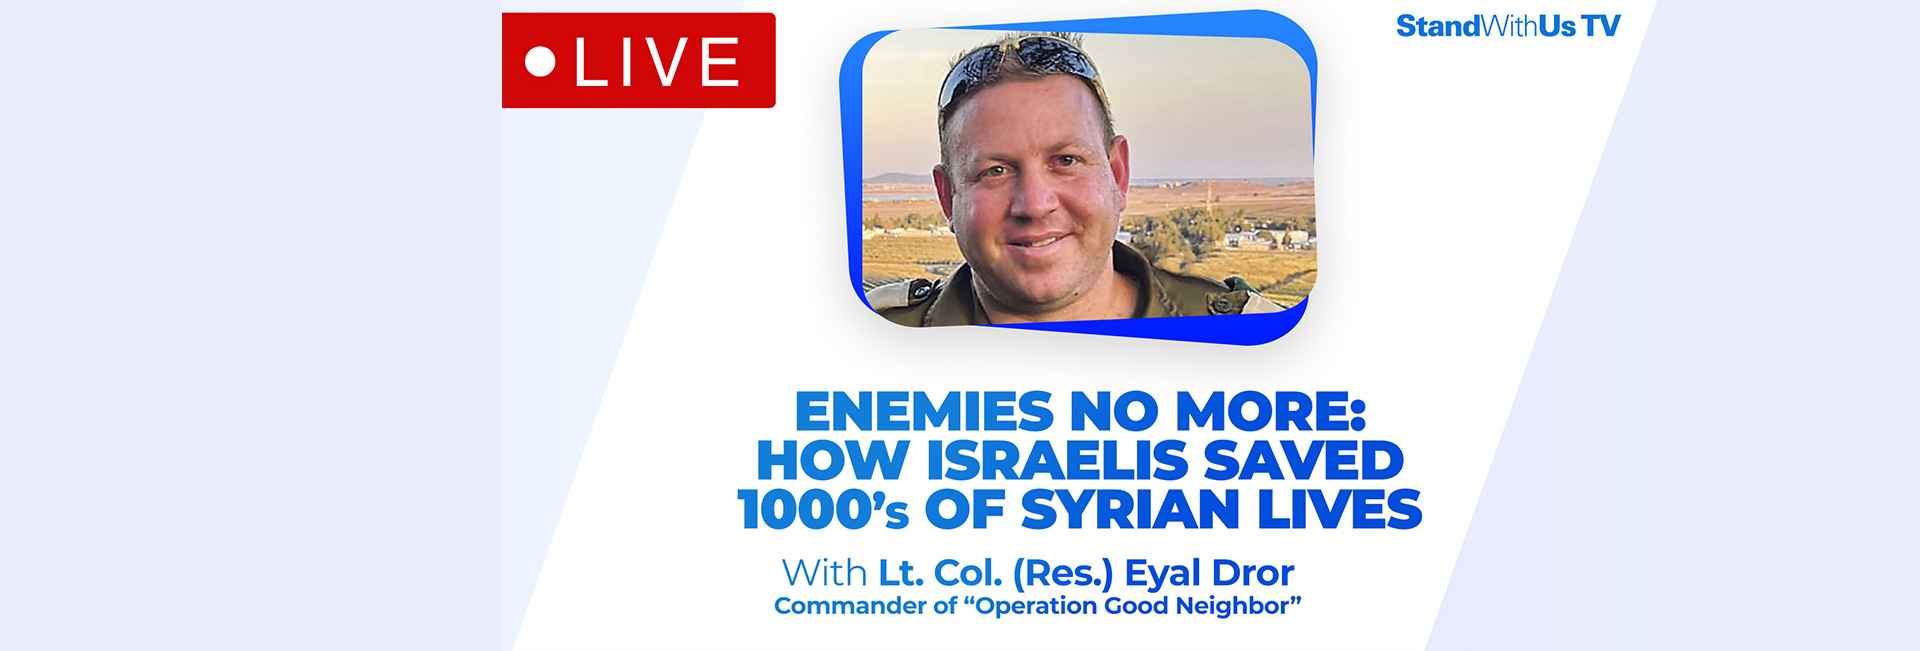 Enemies No More: How Israelis Saved 1000s of Syrian Lives | SWUConnect #5